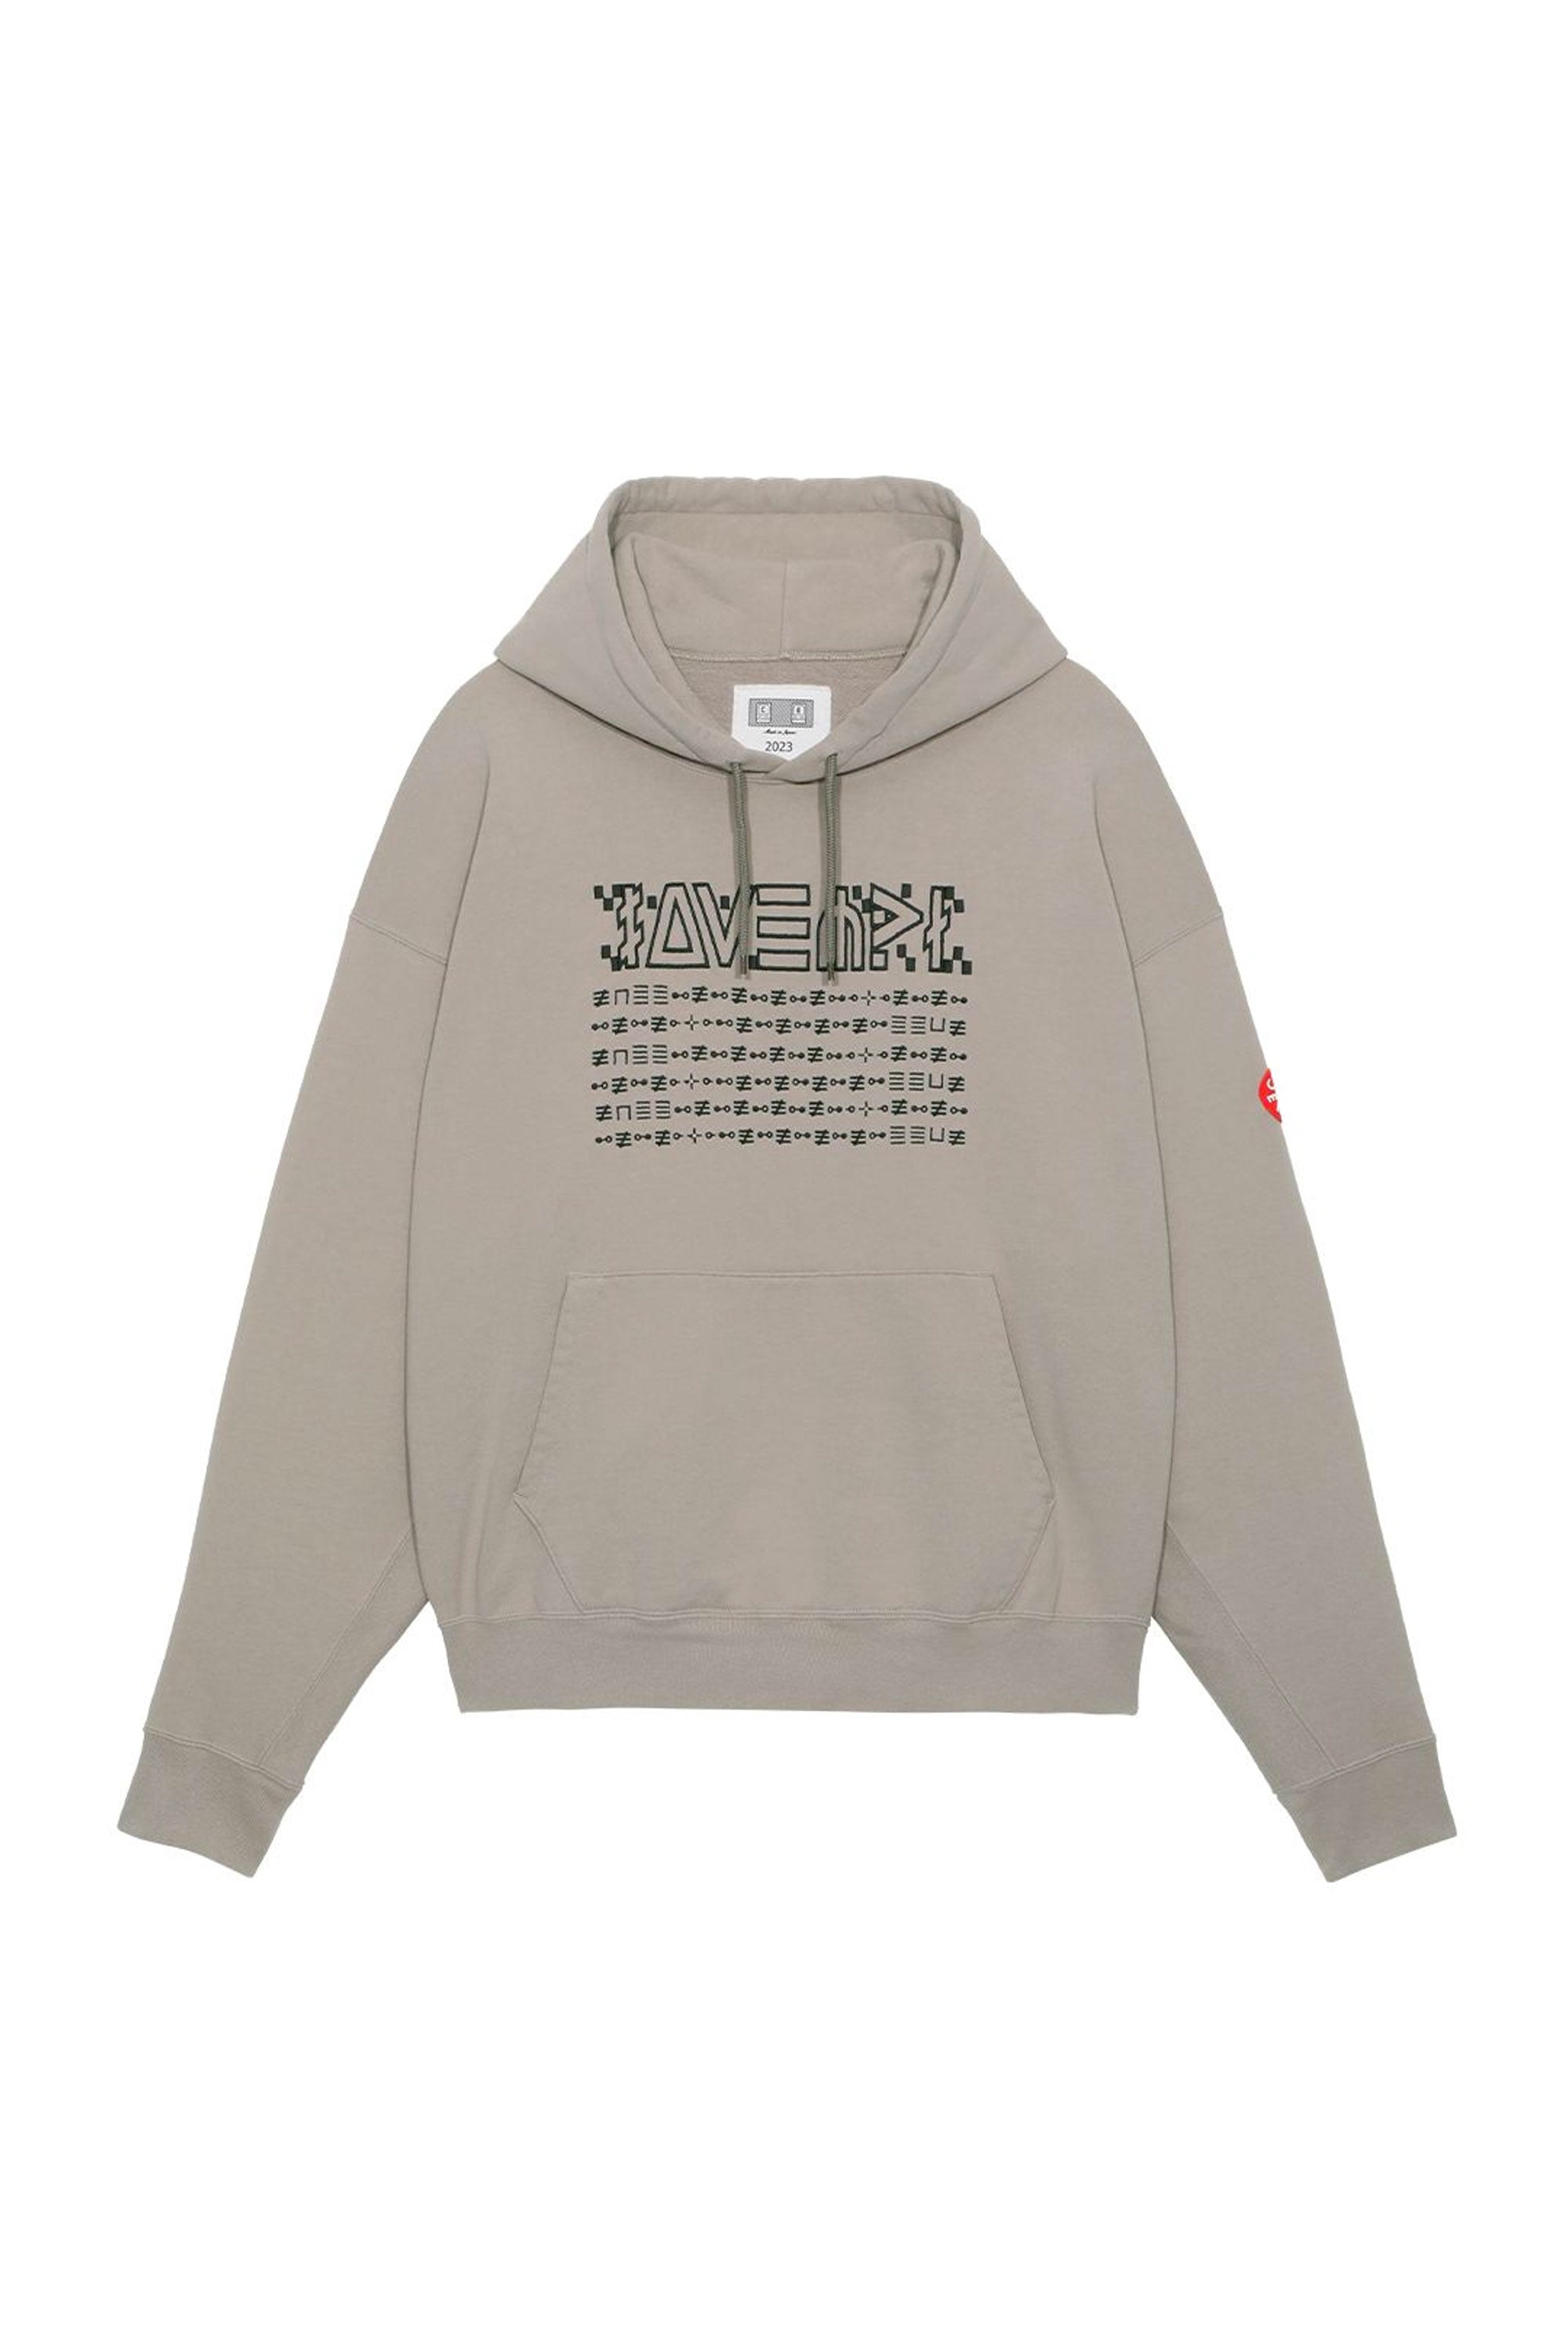 CAV EMPT - CURVED SWITCH HOODY -